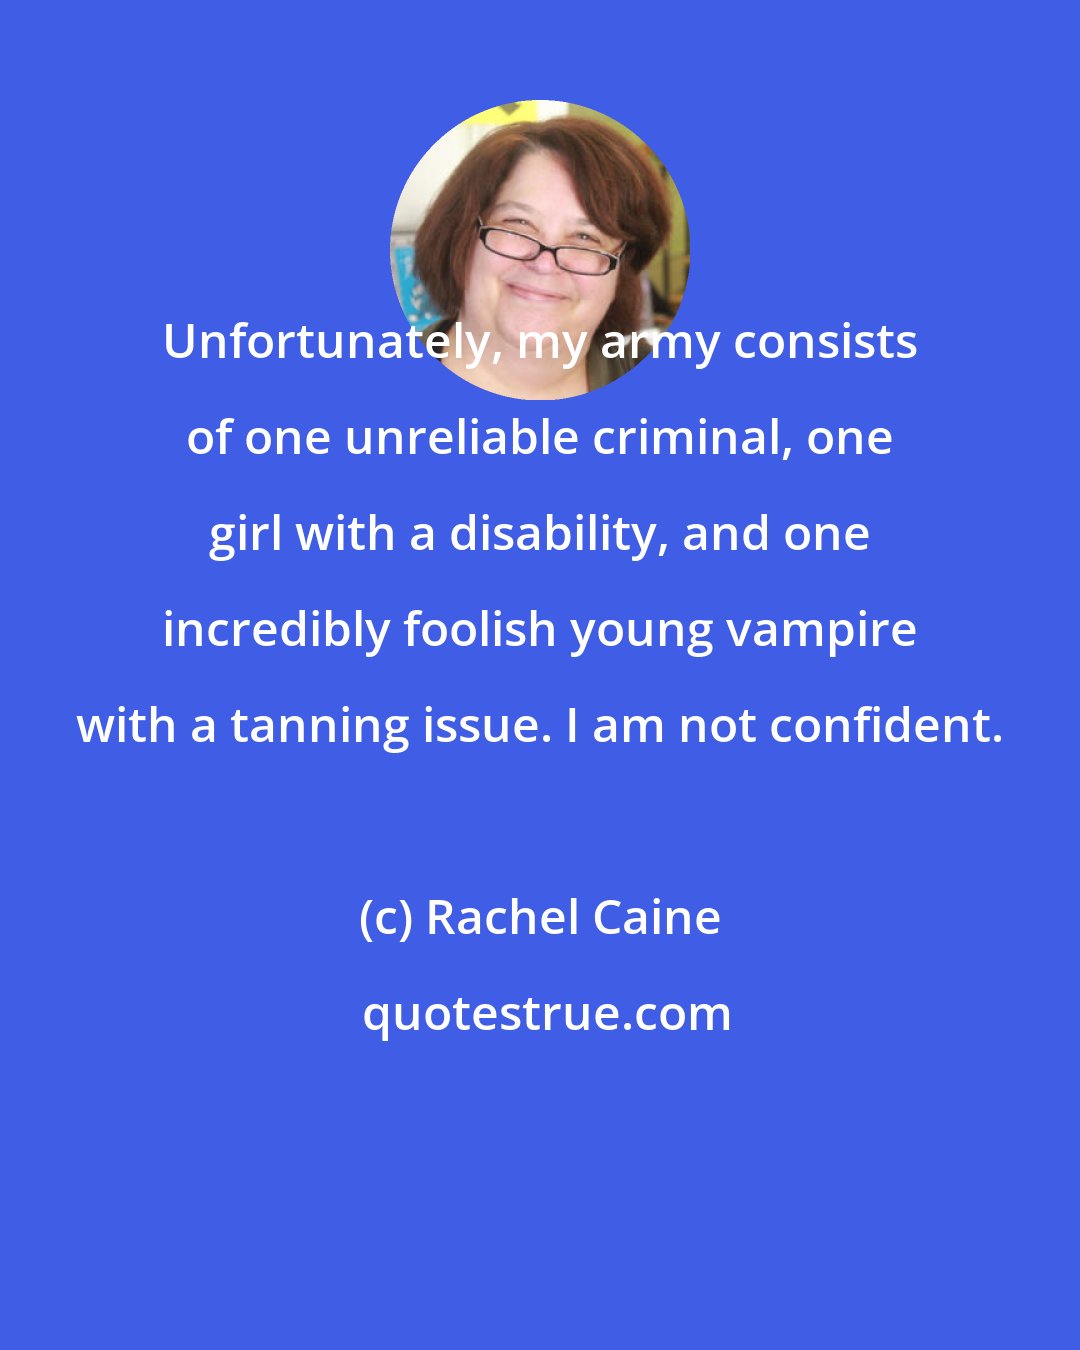 Rachel Caine: Unfortunately, my army consists of one unreliable criminal, one girl with a disability, and one incredibly foolish young vampire with a tanning issue. I am not confident.